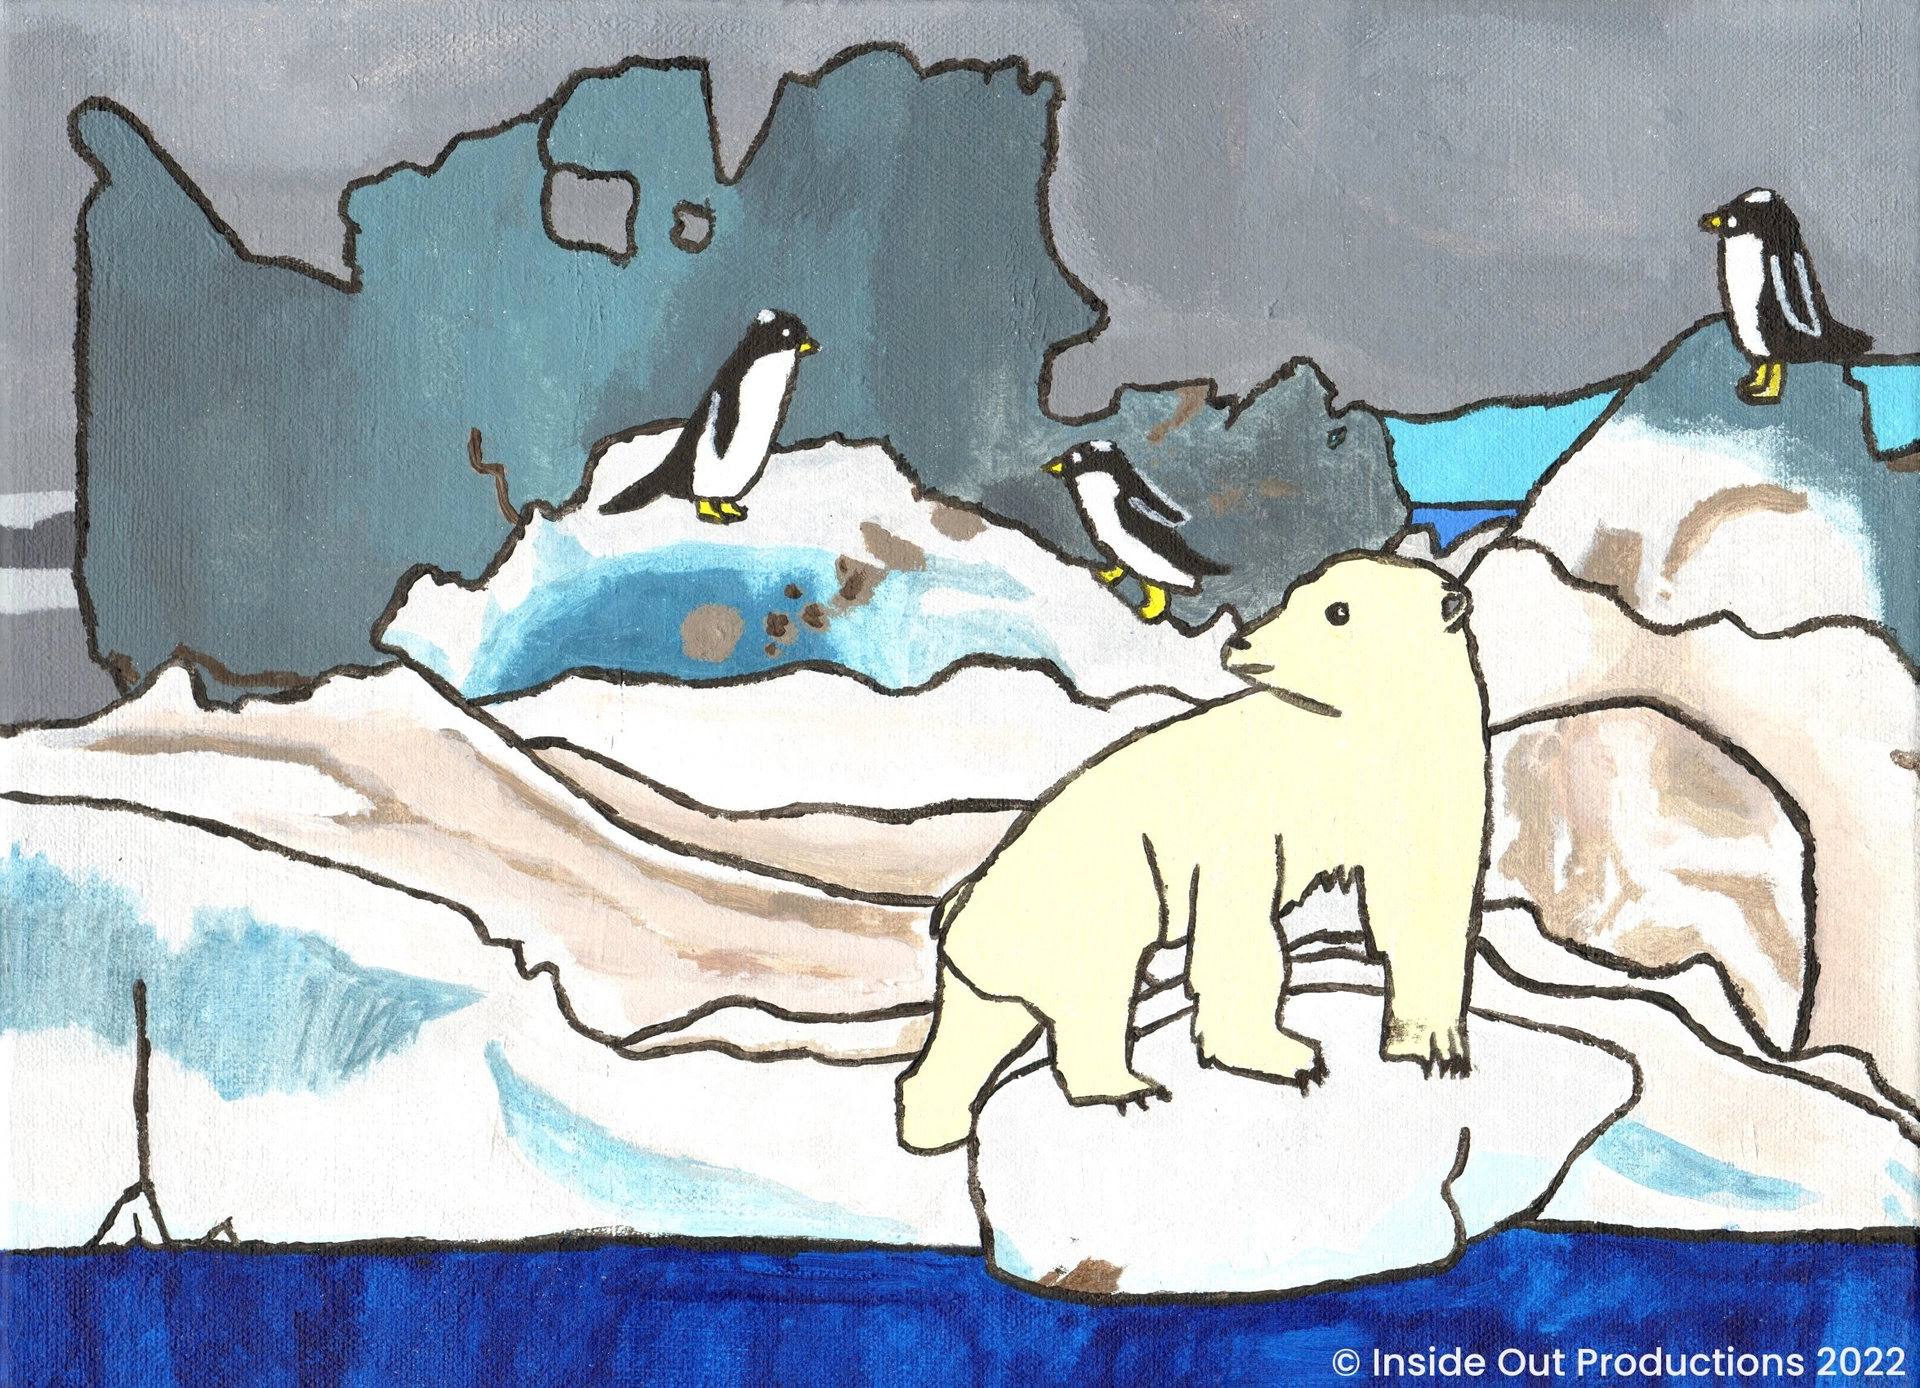 In Antarctica amidst the glacier mountains there are polar bears and penguins. The animals are chilling on the ice. The texture of the ice is painted in white, blue, and beige.